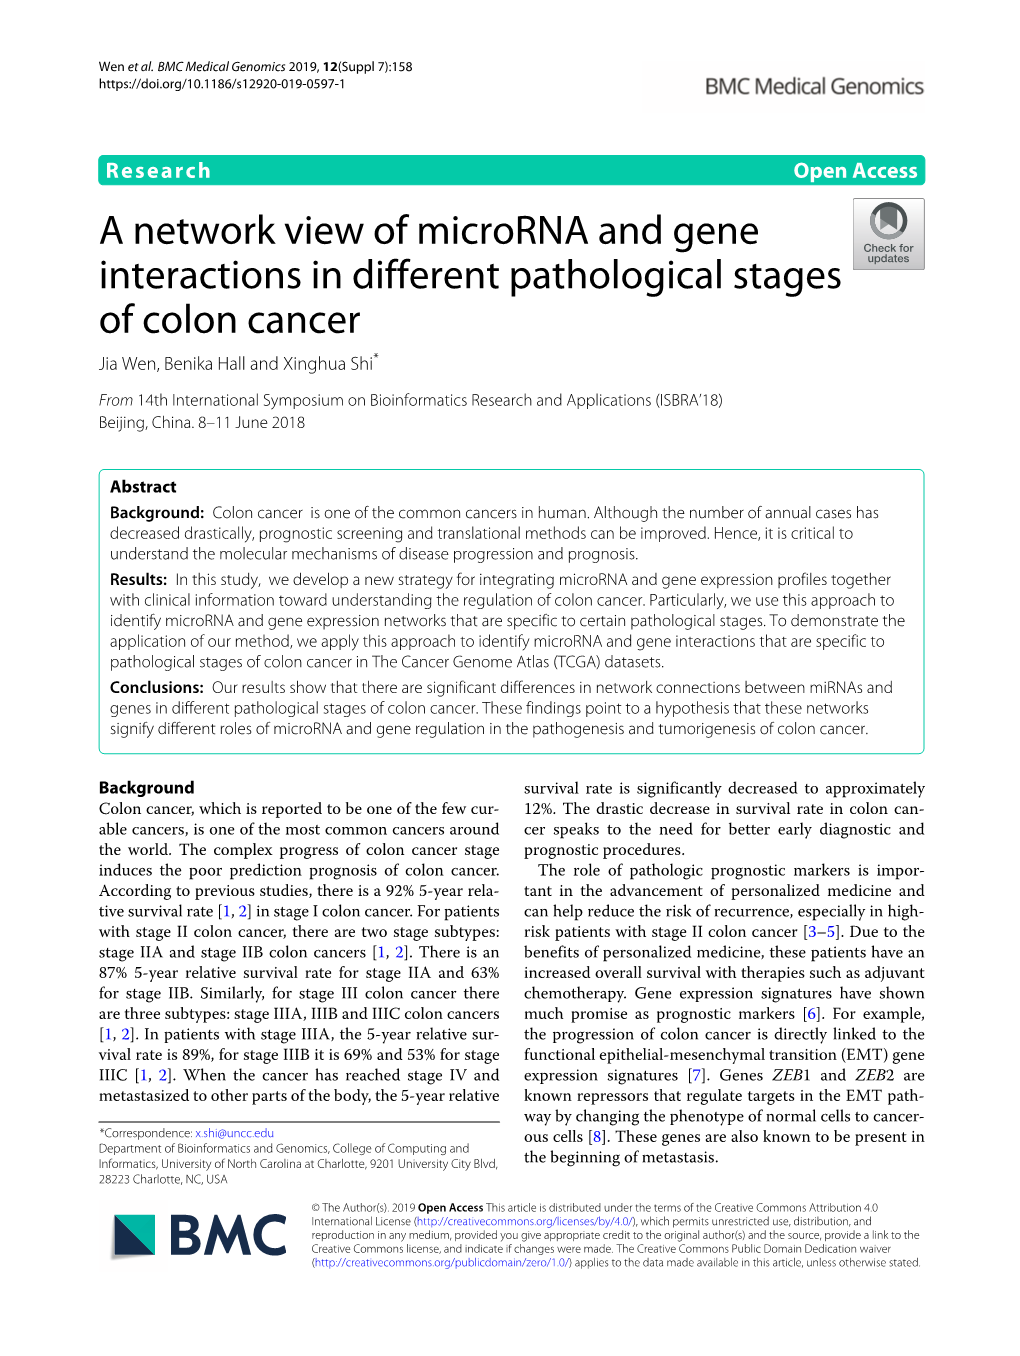 A Network View of Microrna and Gene Interactions in Different Pathological Stages of Colon Cancer Jia Wen, Benika Hall and Xinghua Shi*